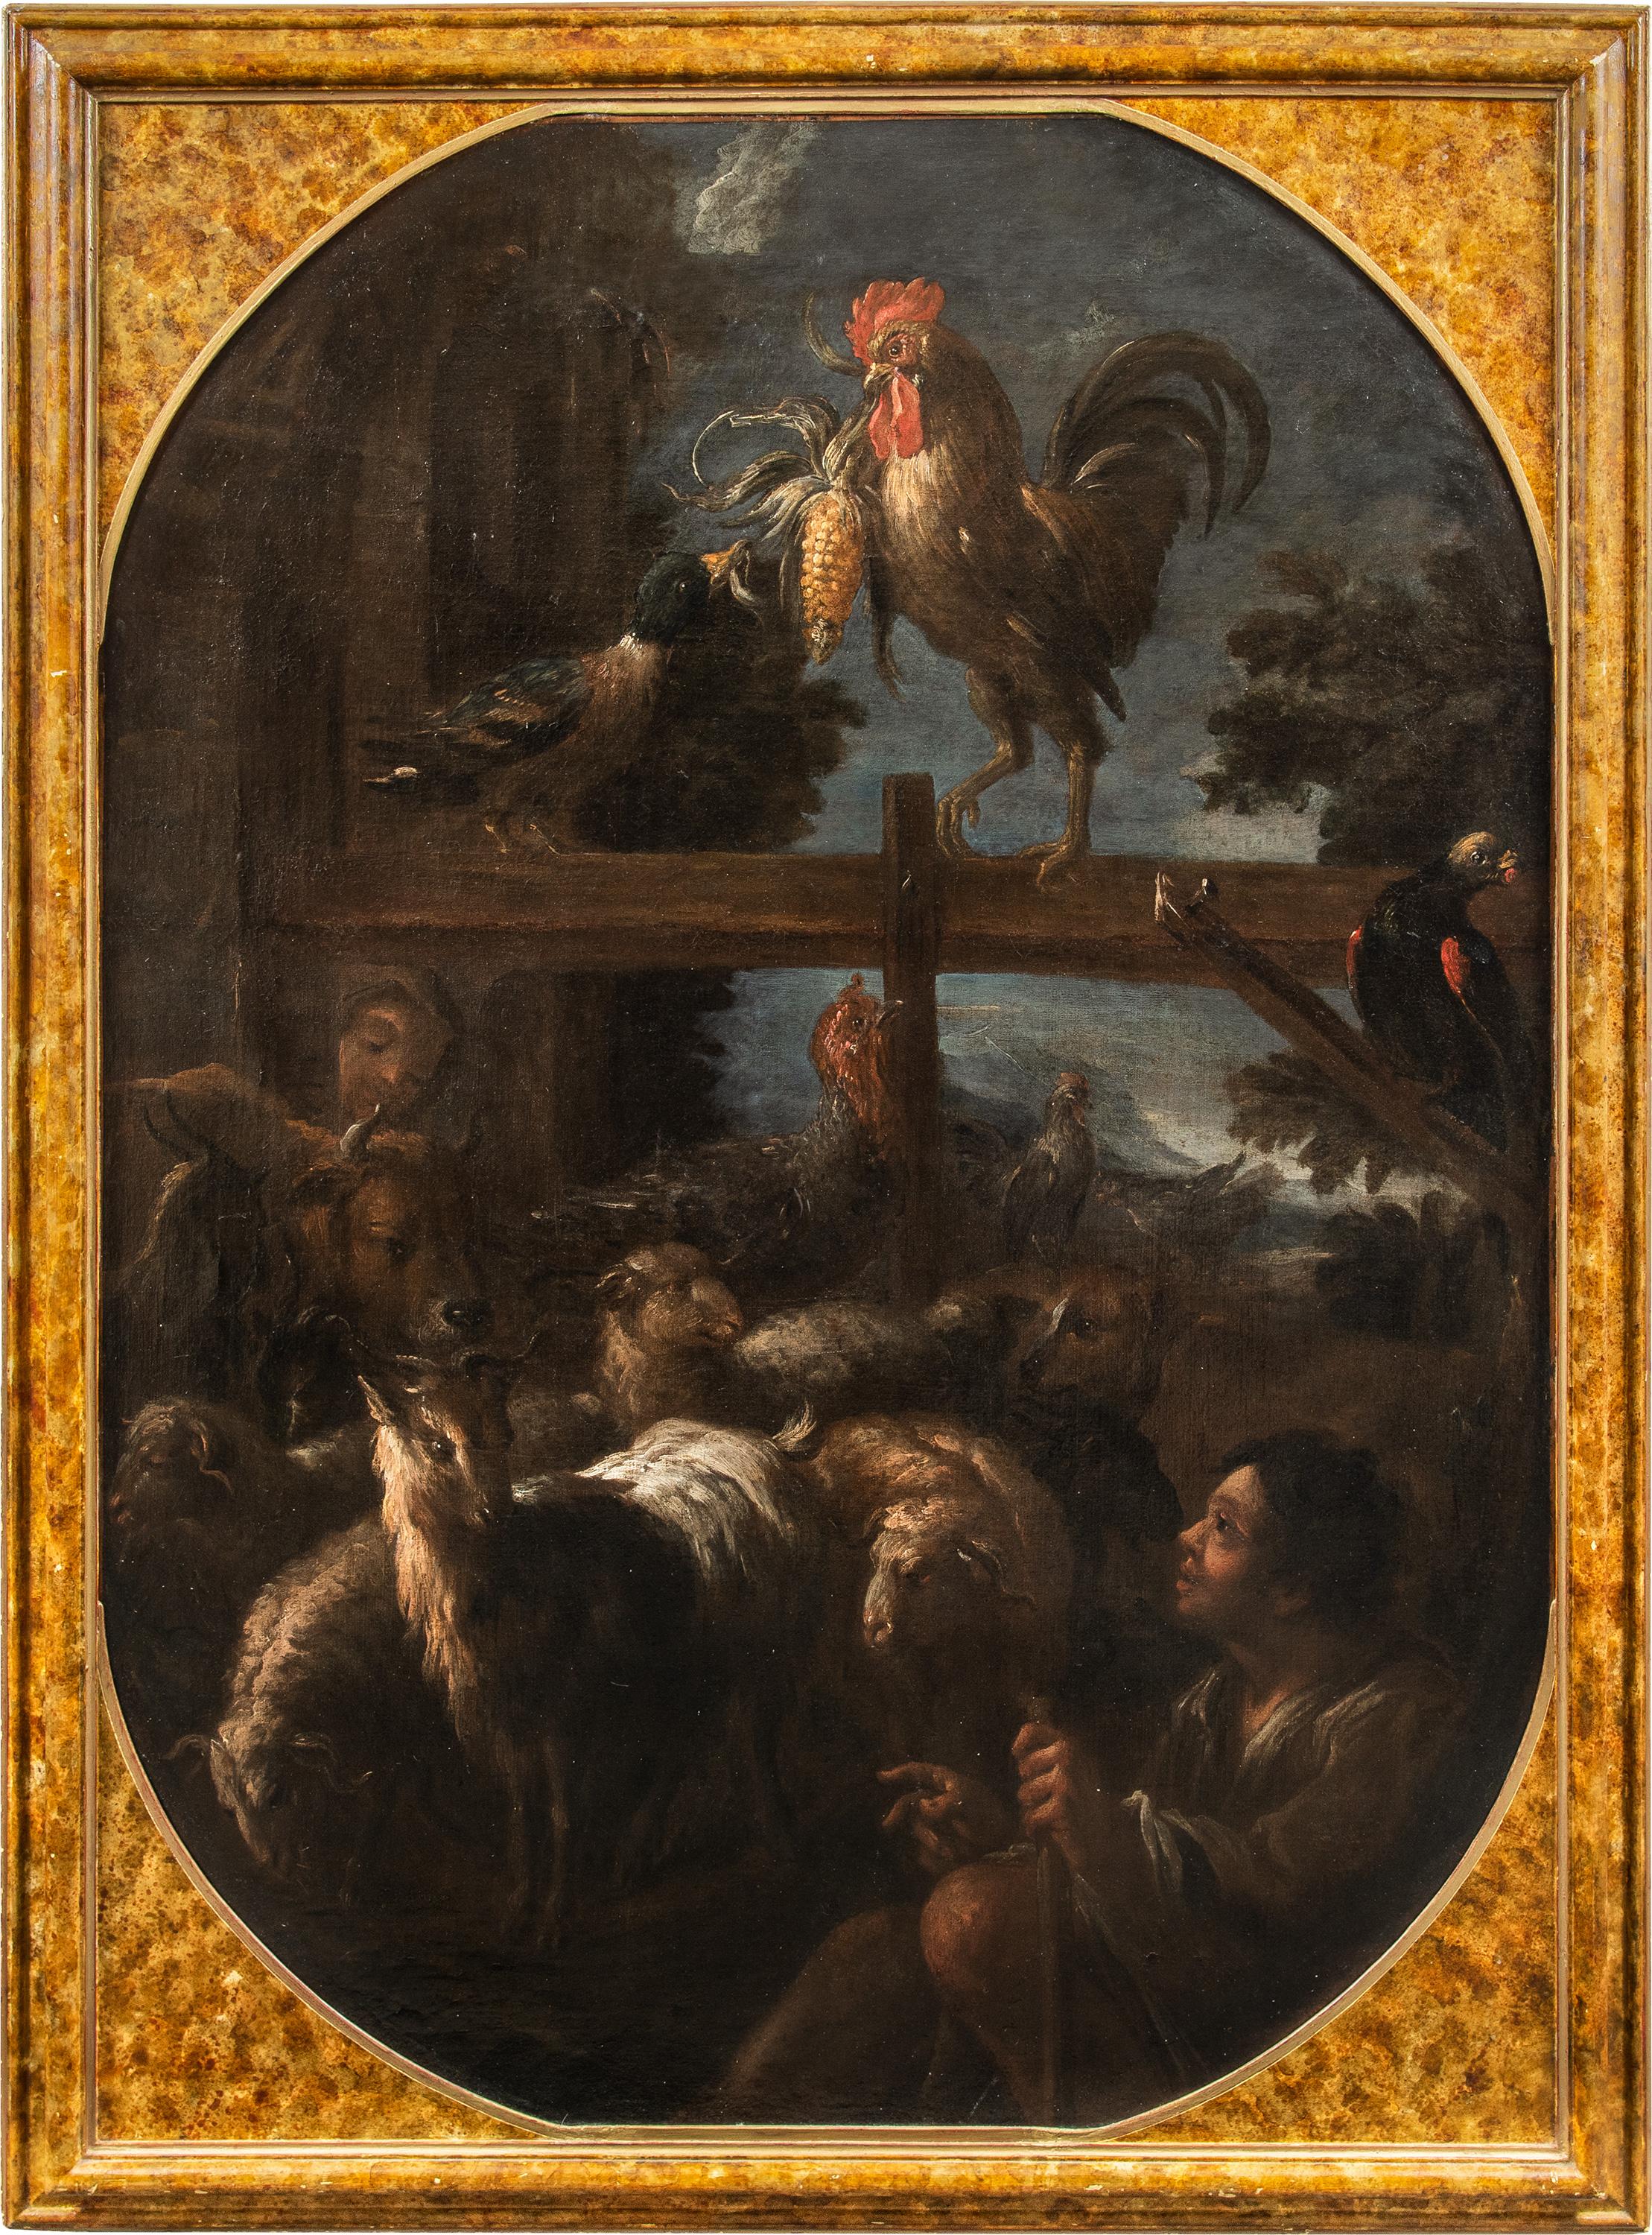 Felice Boselli (Piacenza 1650 - Parma 1732) - Shepherd with flock and game.

155 x 112 cm without frame, 170 x 126 cm with frame.

Oil on canvas, in a faux marble lacquered wooden frame.

The painting has stylistic affinities with "Game with